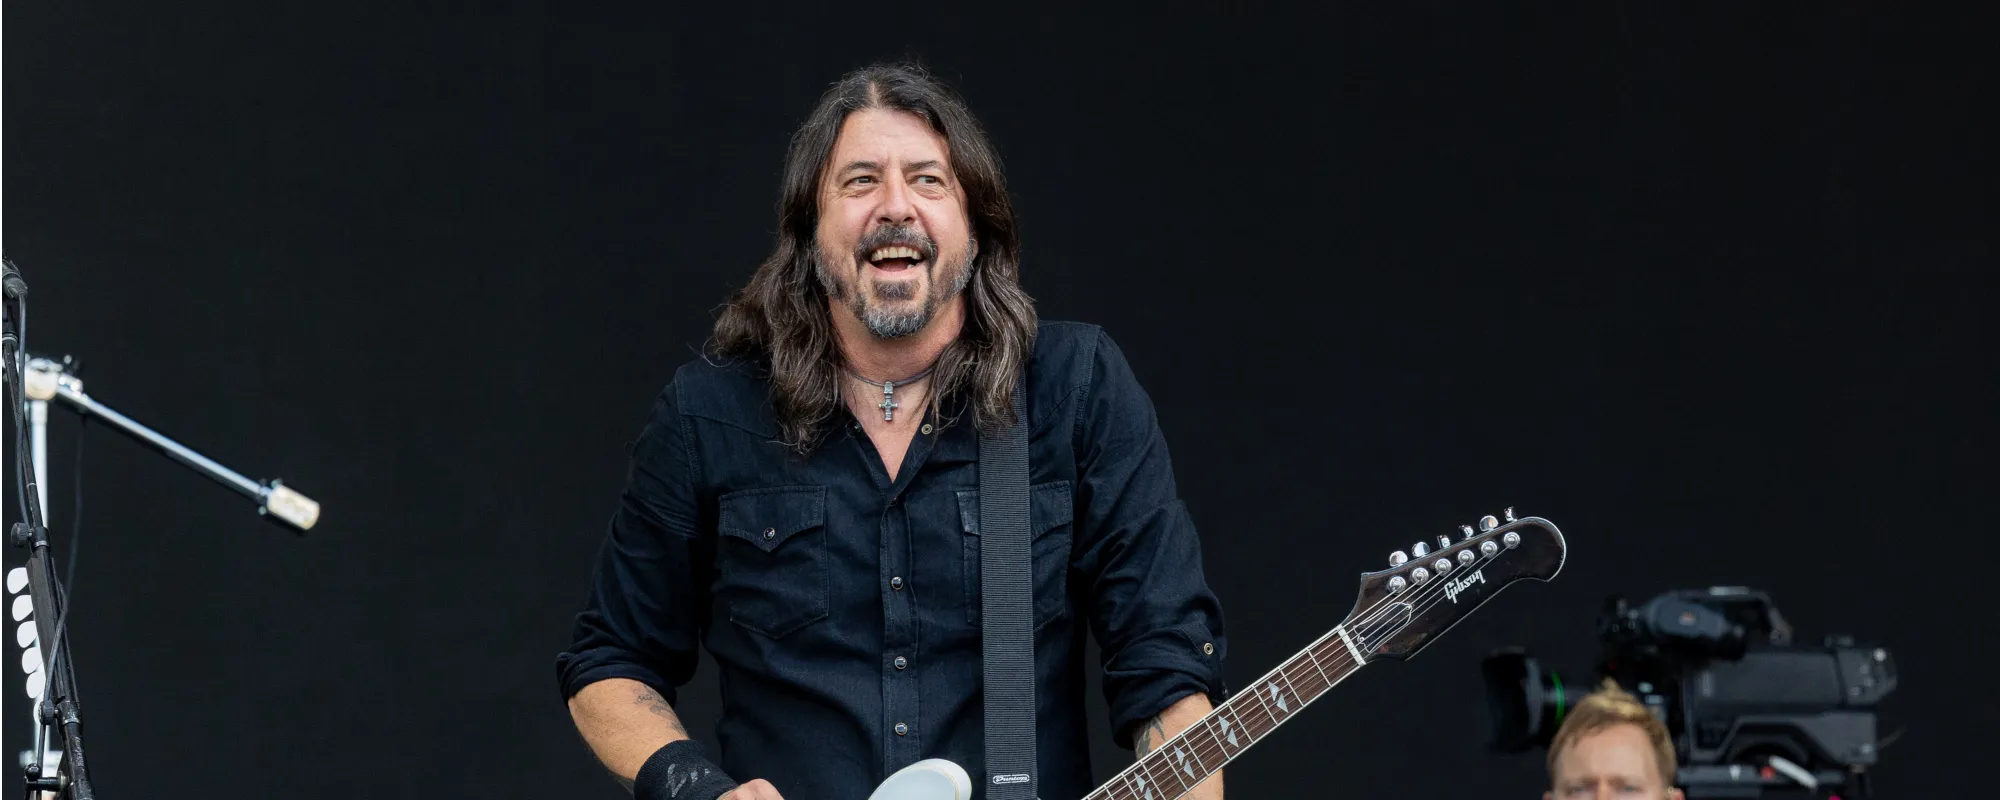 Watch: Dave Grohl Joins Boygenius for “Satanist” During Halloween Show